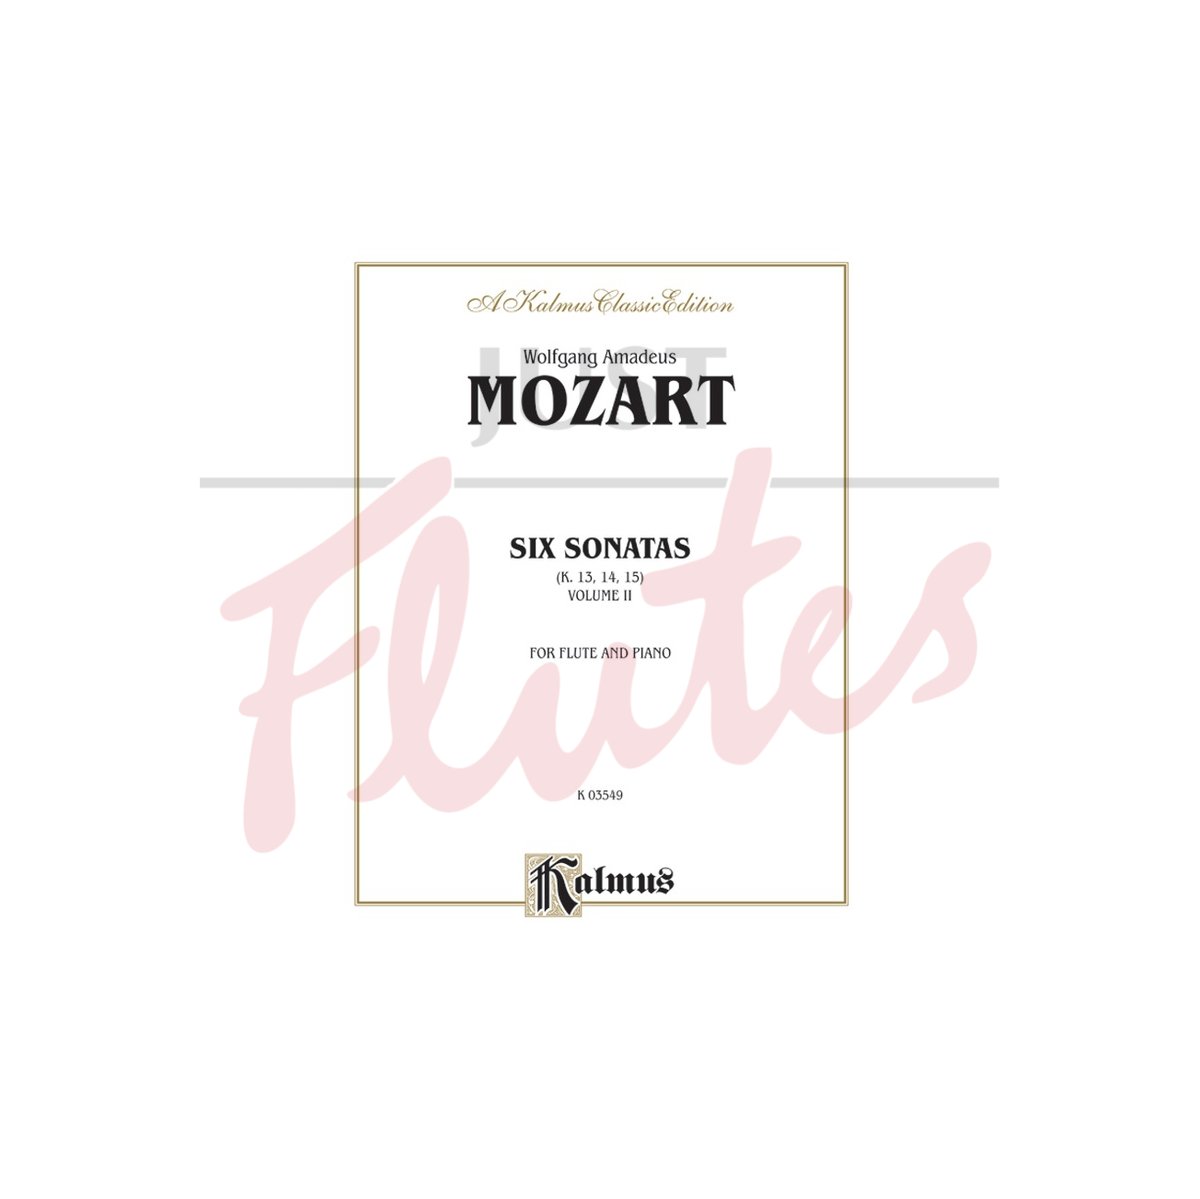 Six Sonatas for Flute and Piano Volume 2